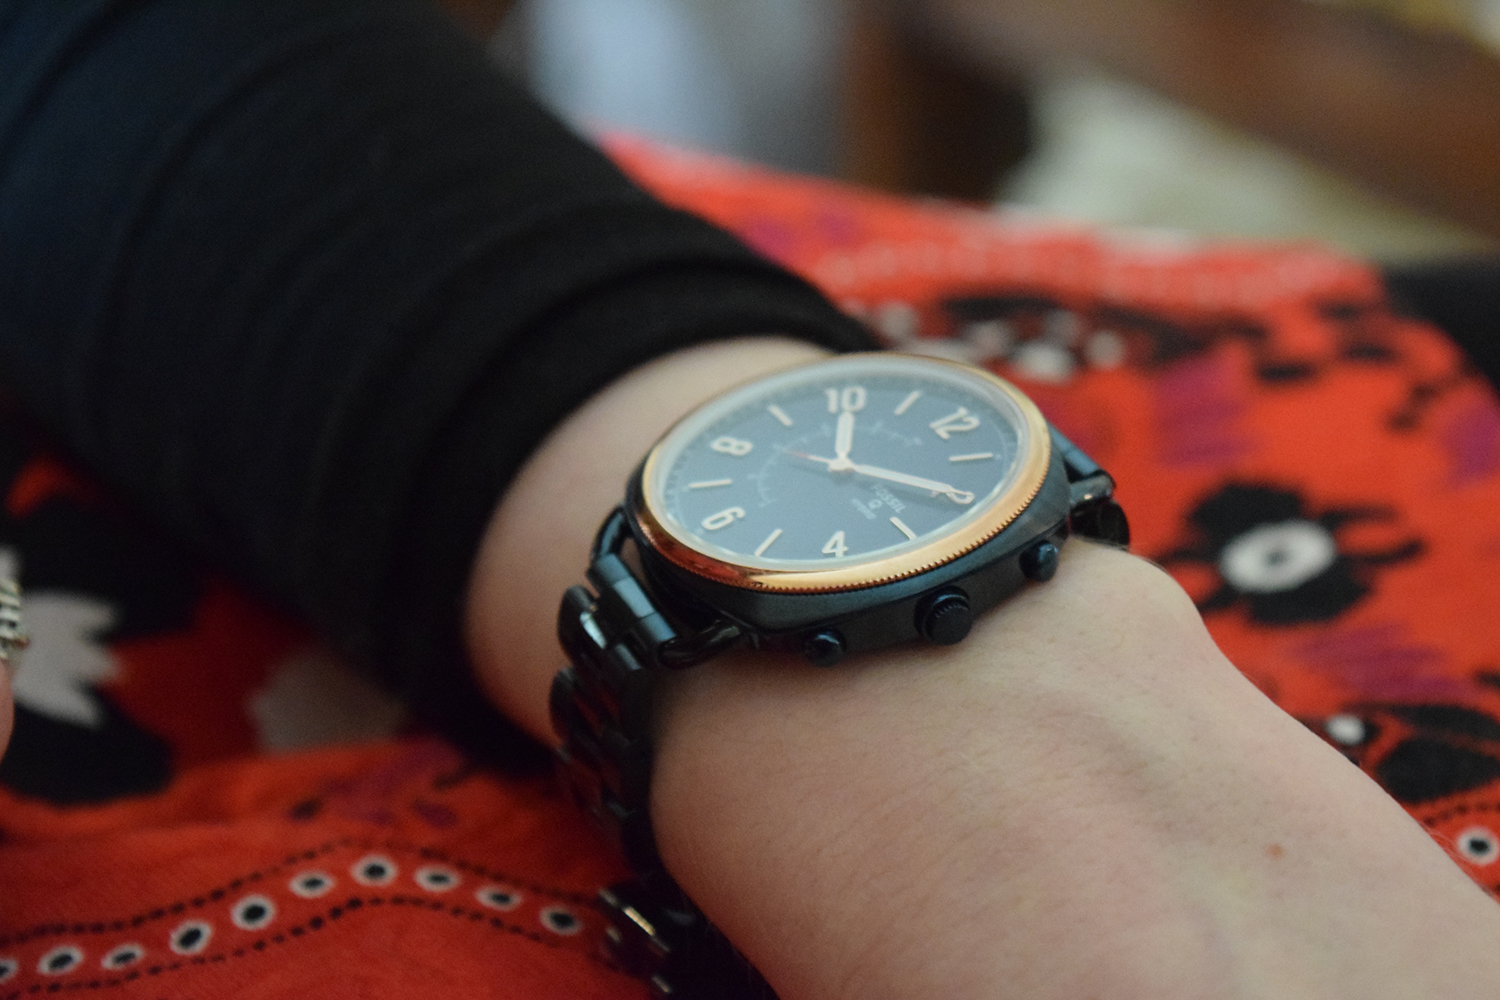 Fossil Smartwatches at CES